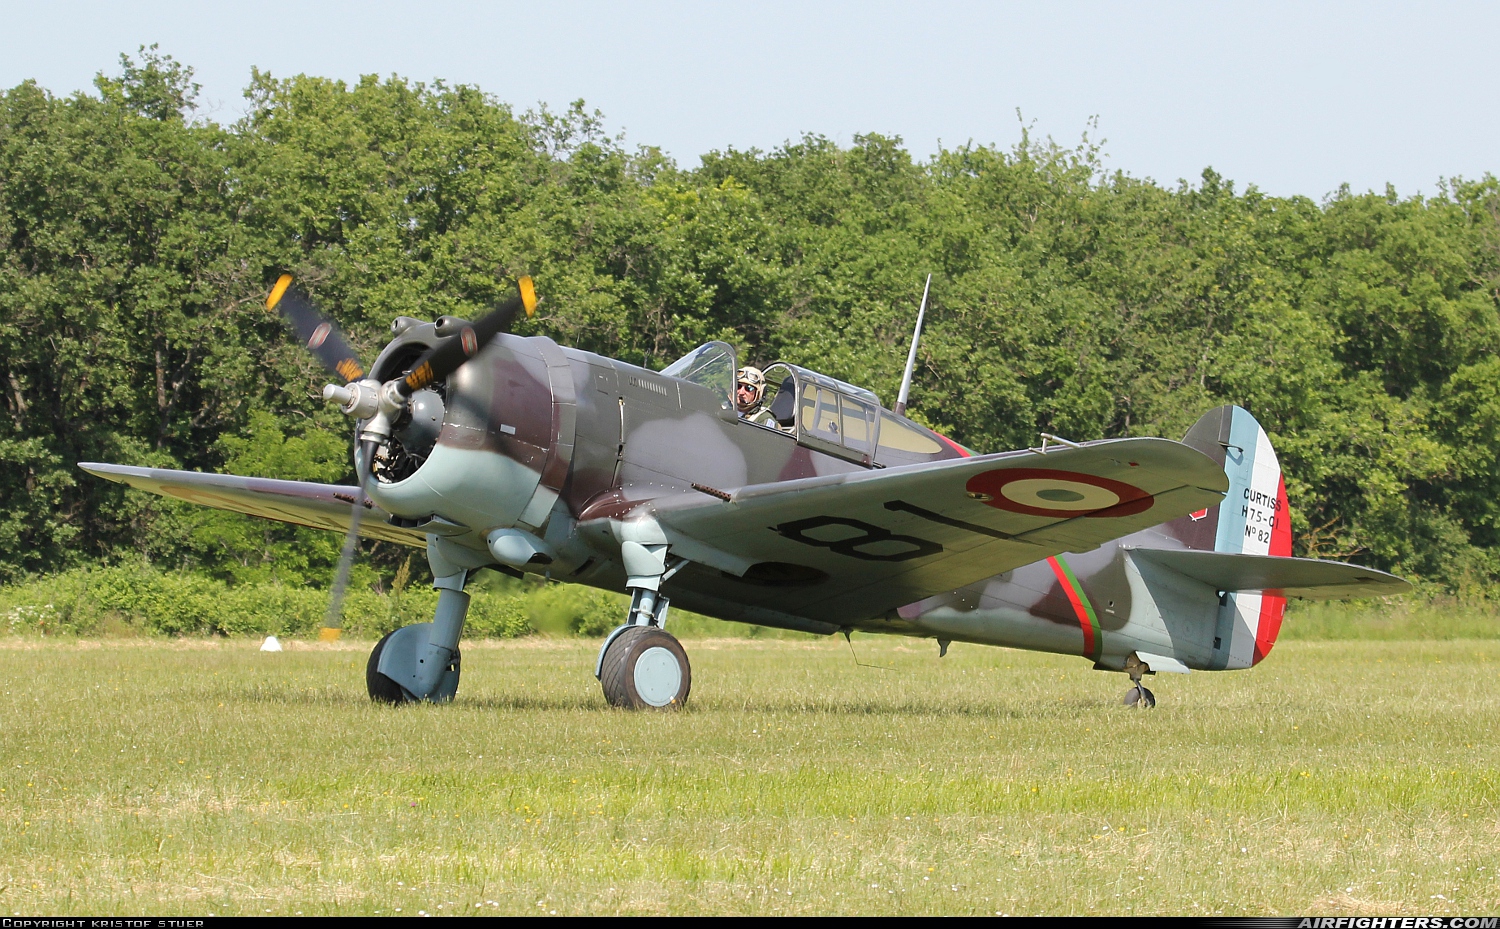 Private - The Fighter Collection Curtiss Hawk 75A-1 G-CCVH at La Ferte - Alais (LFFQ), France